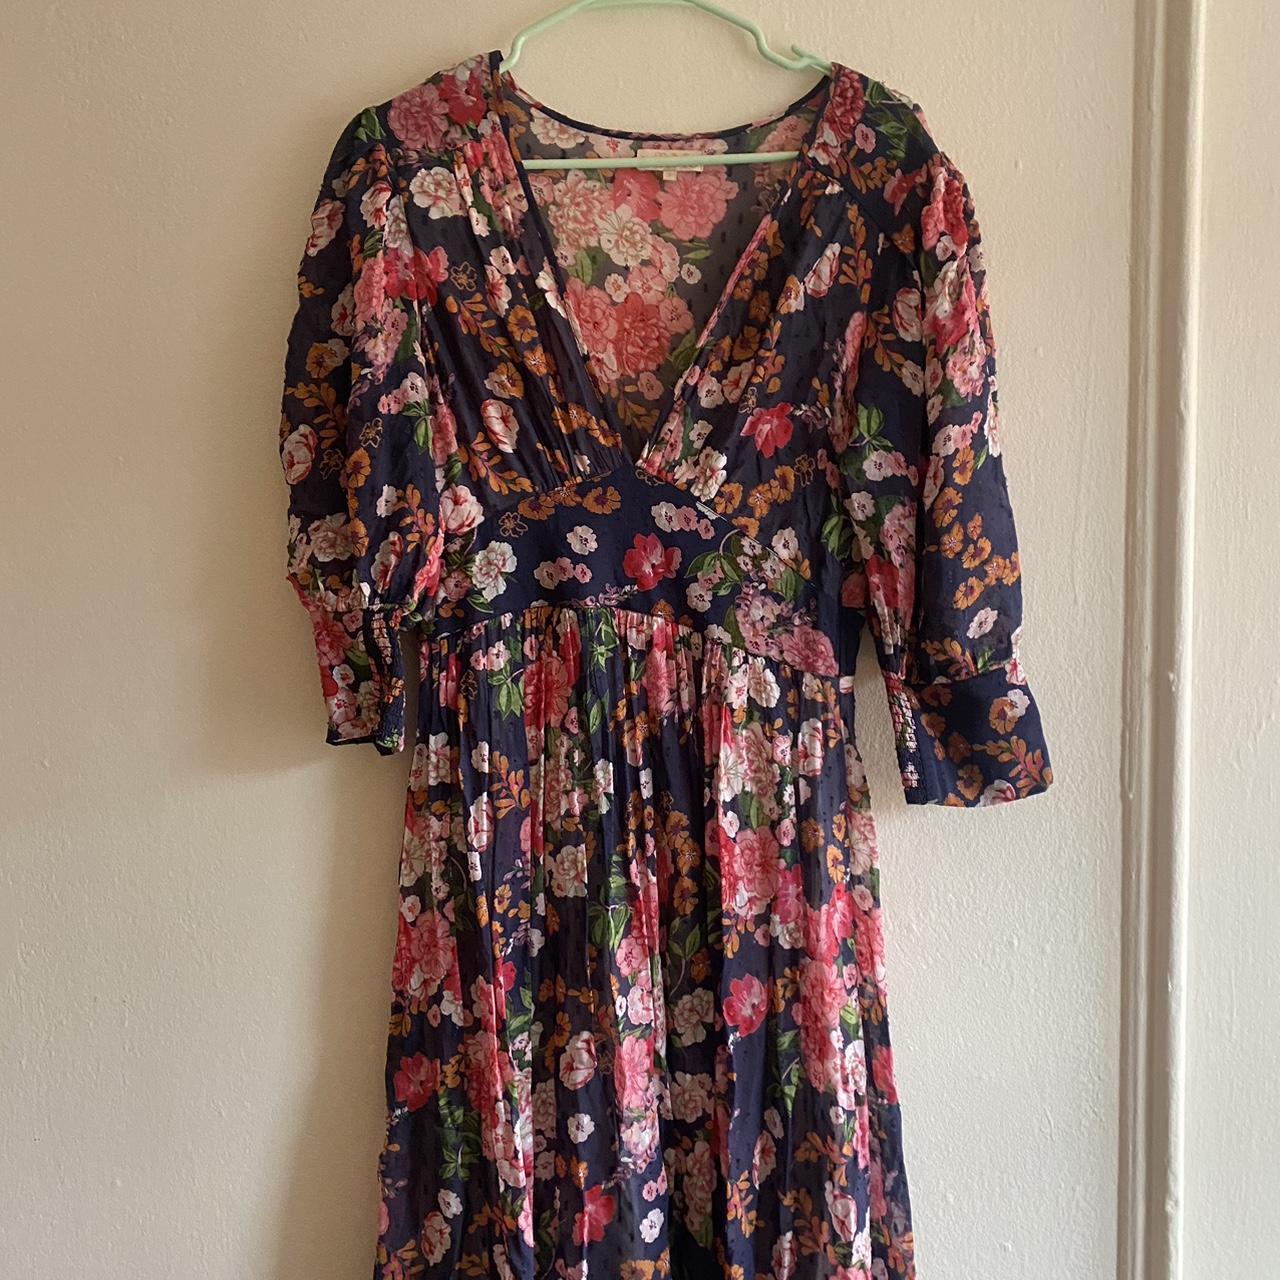 item listed by chrisssvintage